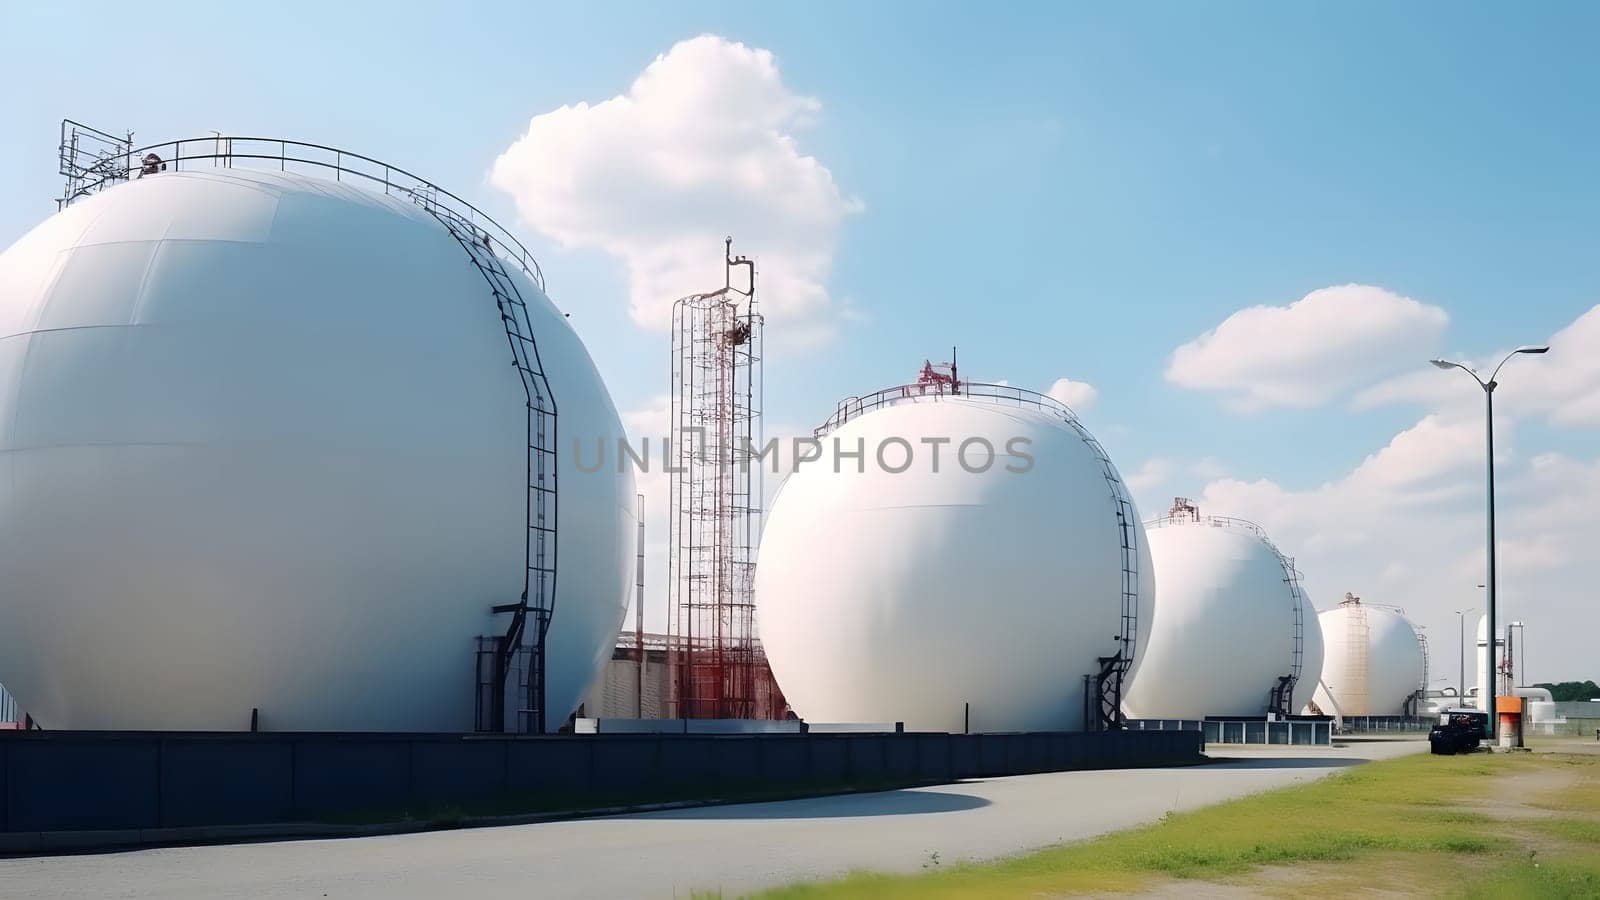 white spherical tanks for storing hydrogen gas at outdoor storage facility, neural network generated image by z1b